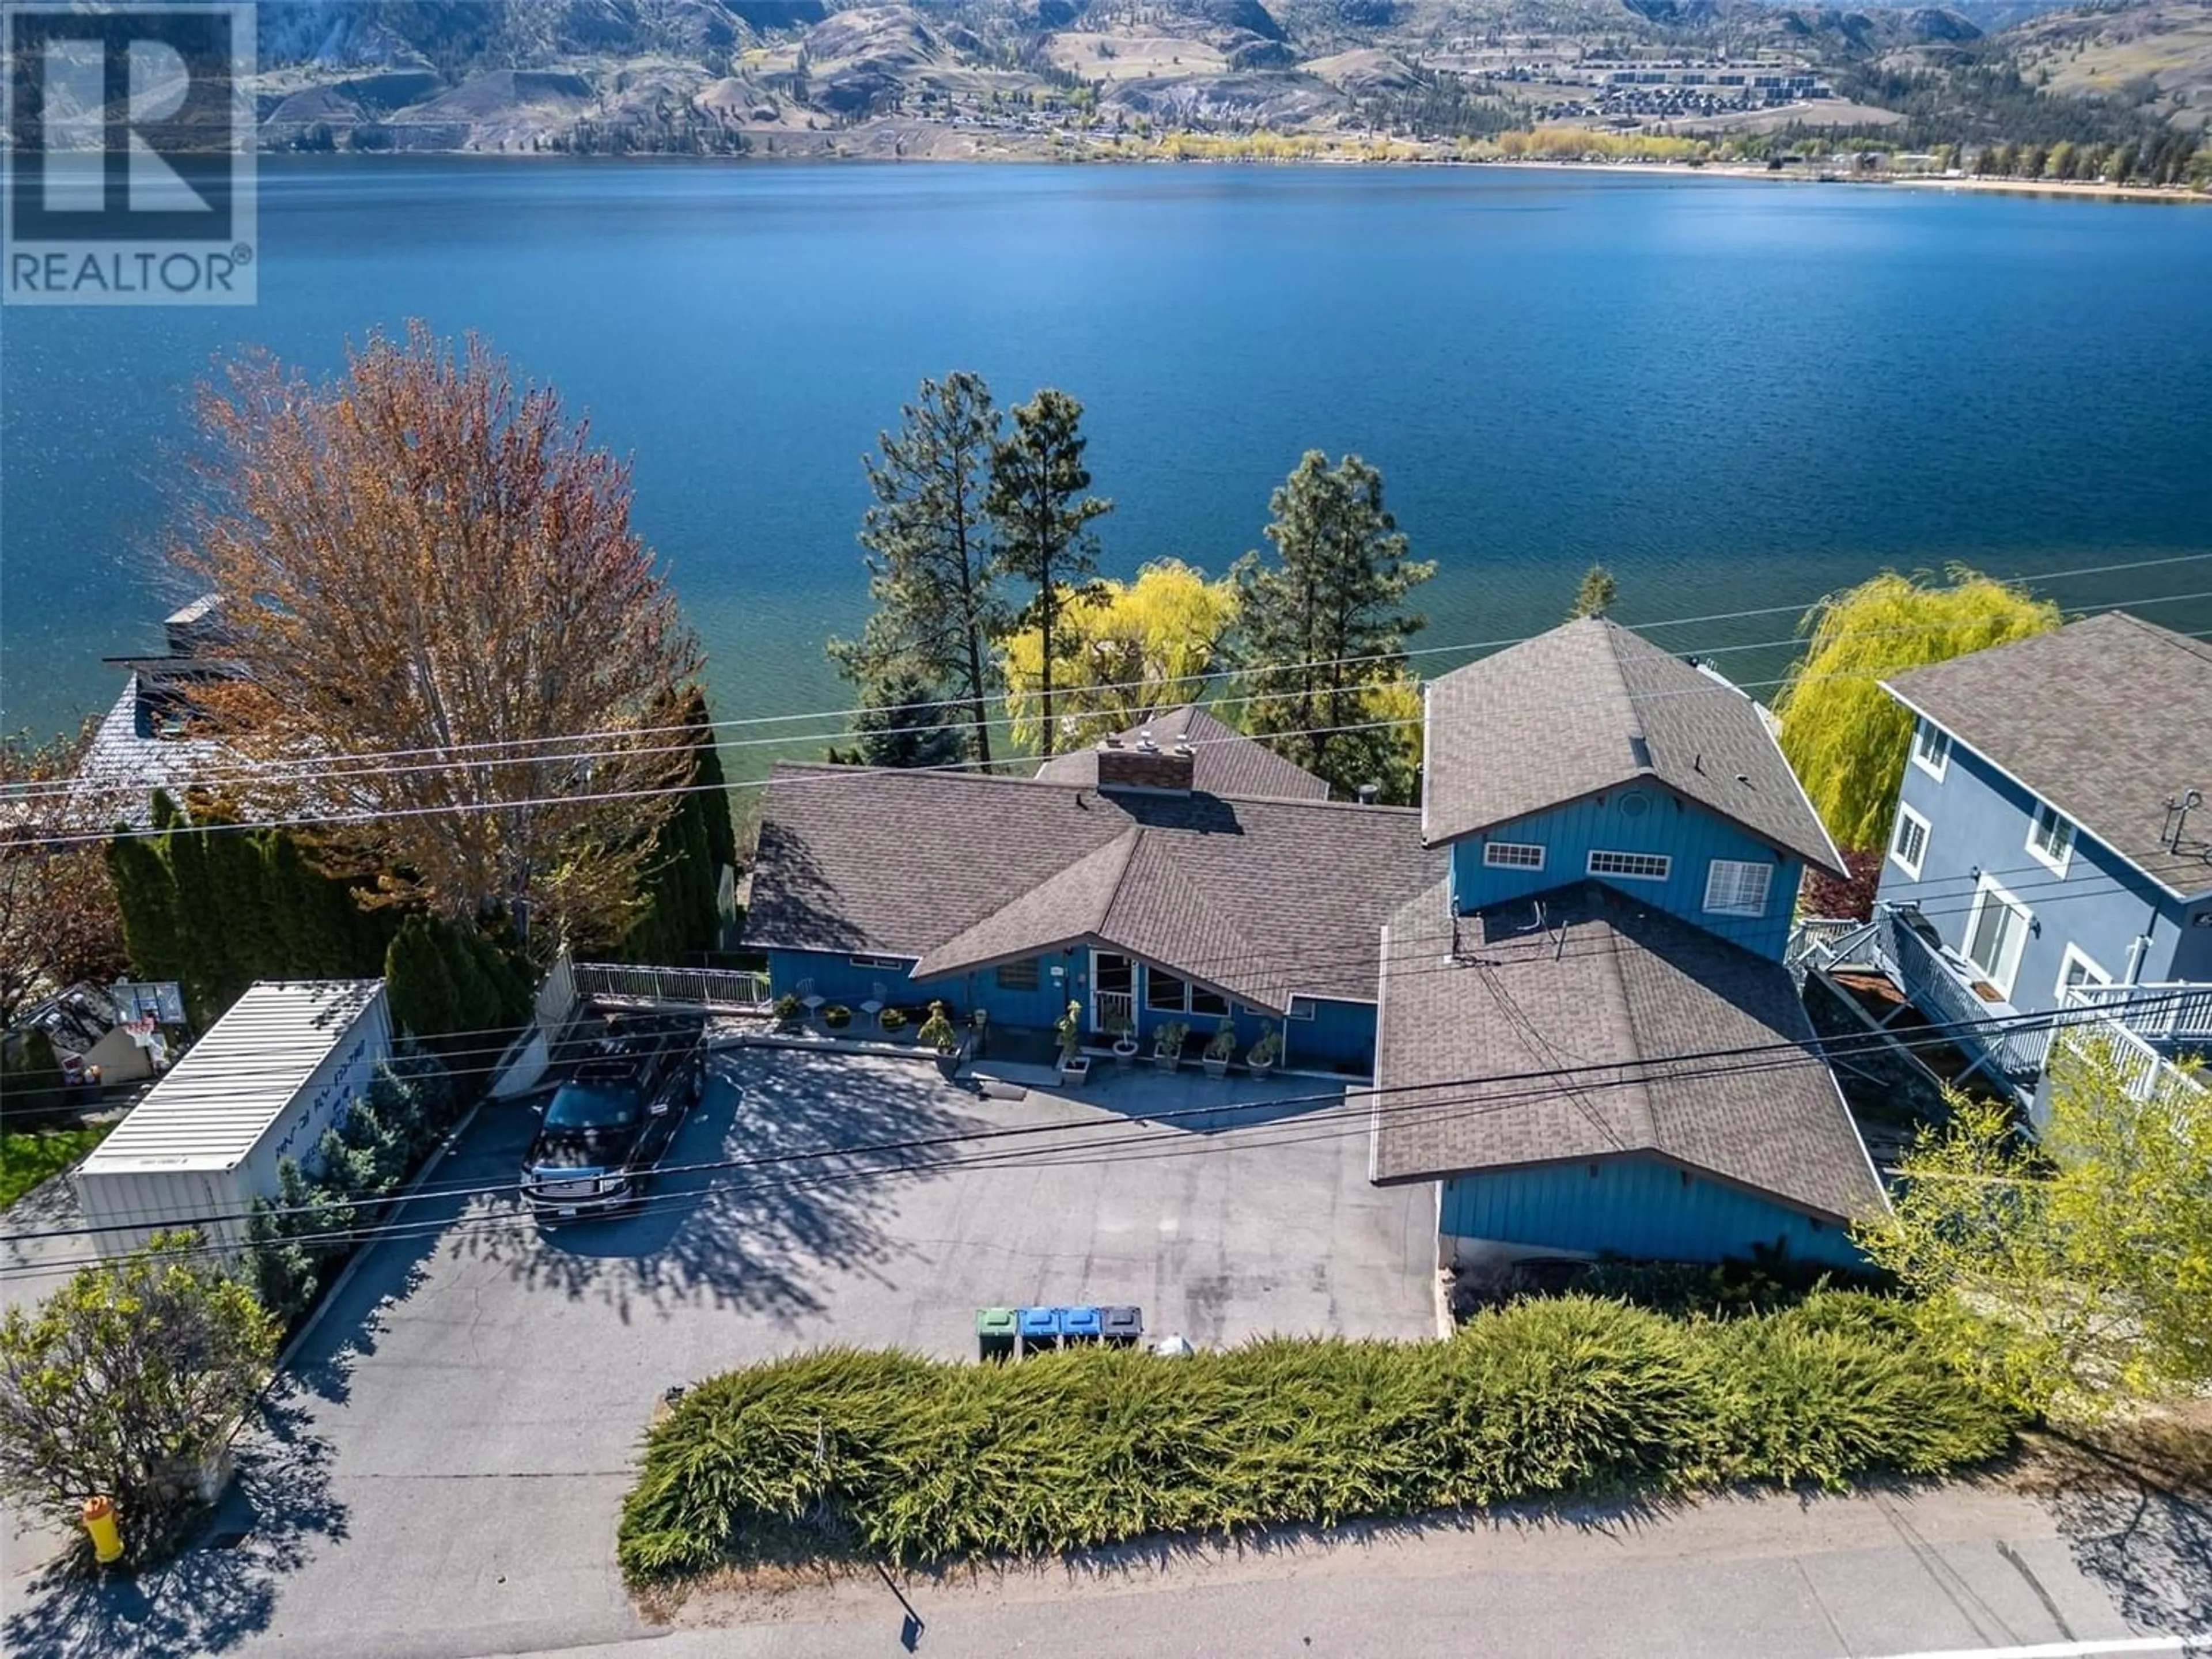 Lakeview for 4021 Lakeside Road, Penticton British Columbia V2A8W3